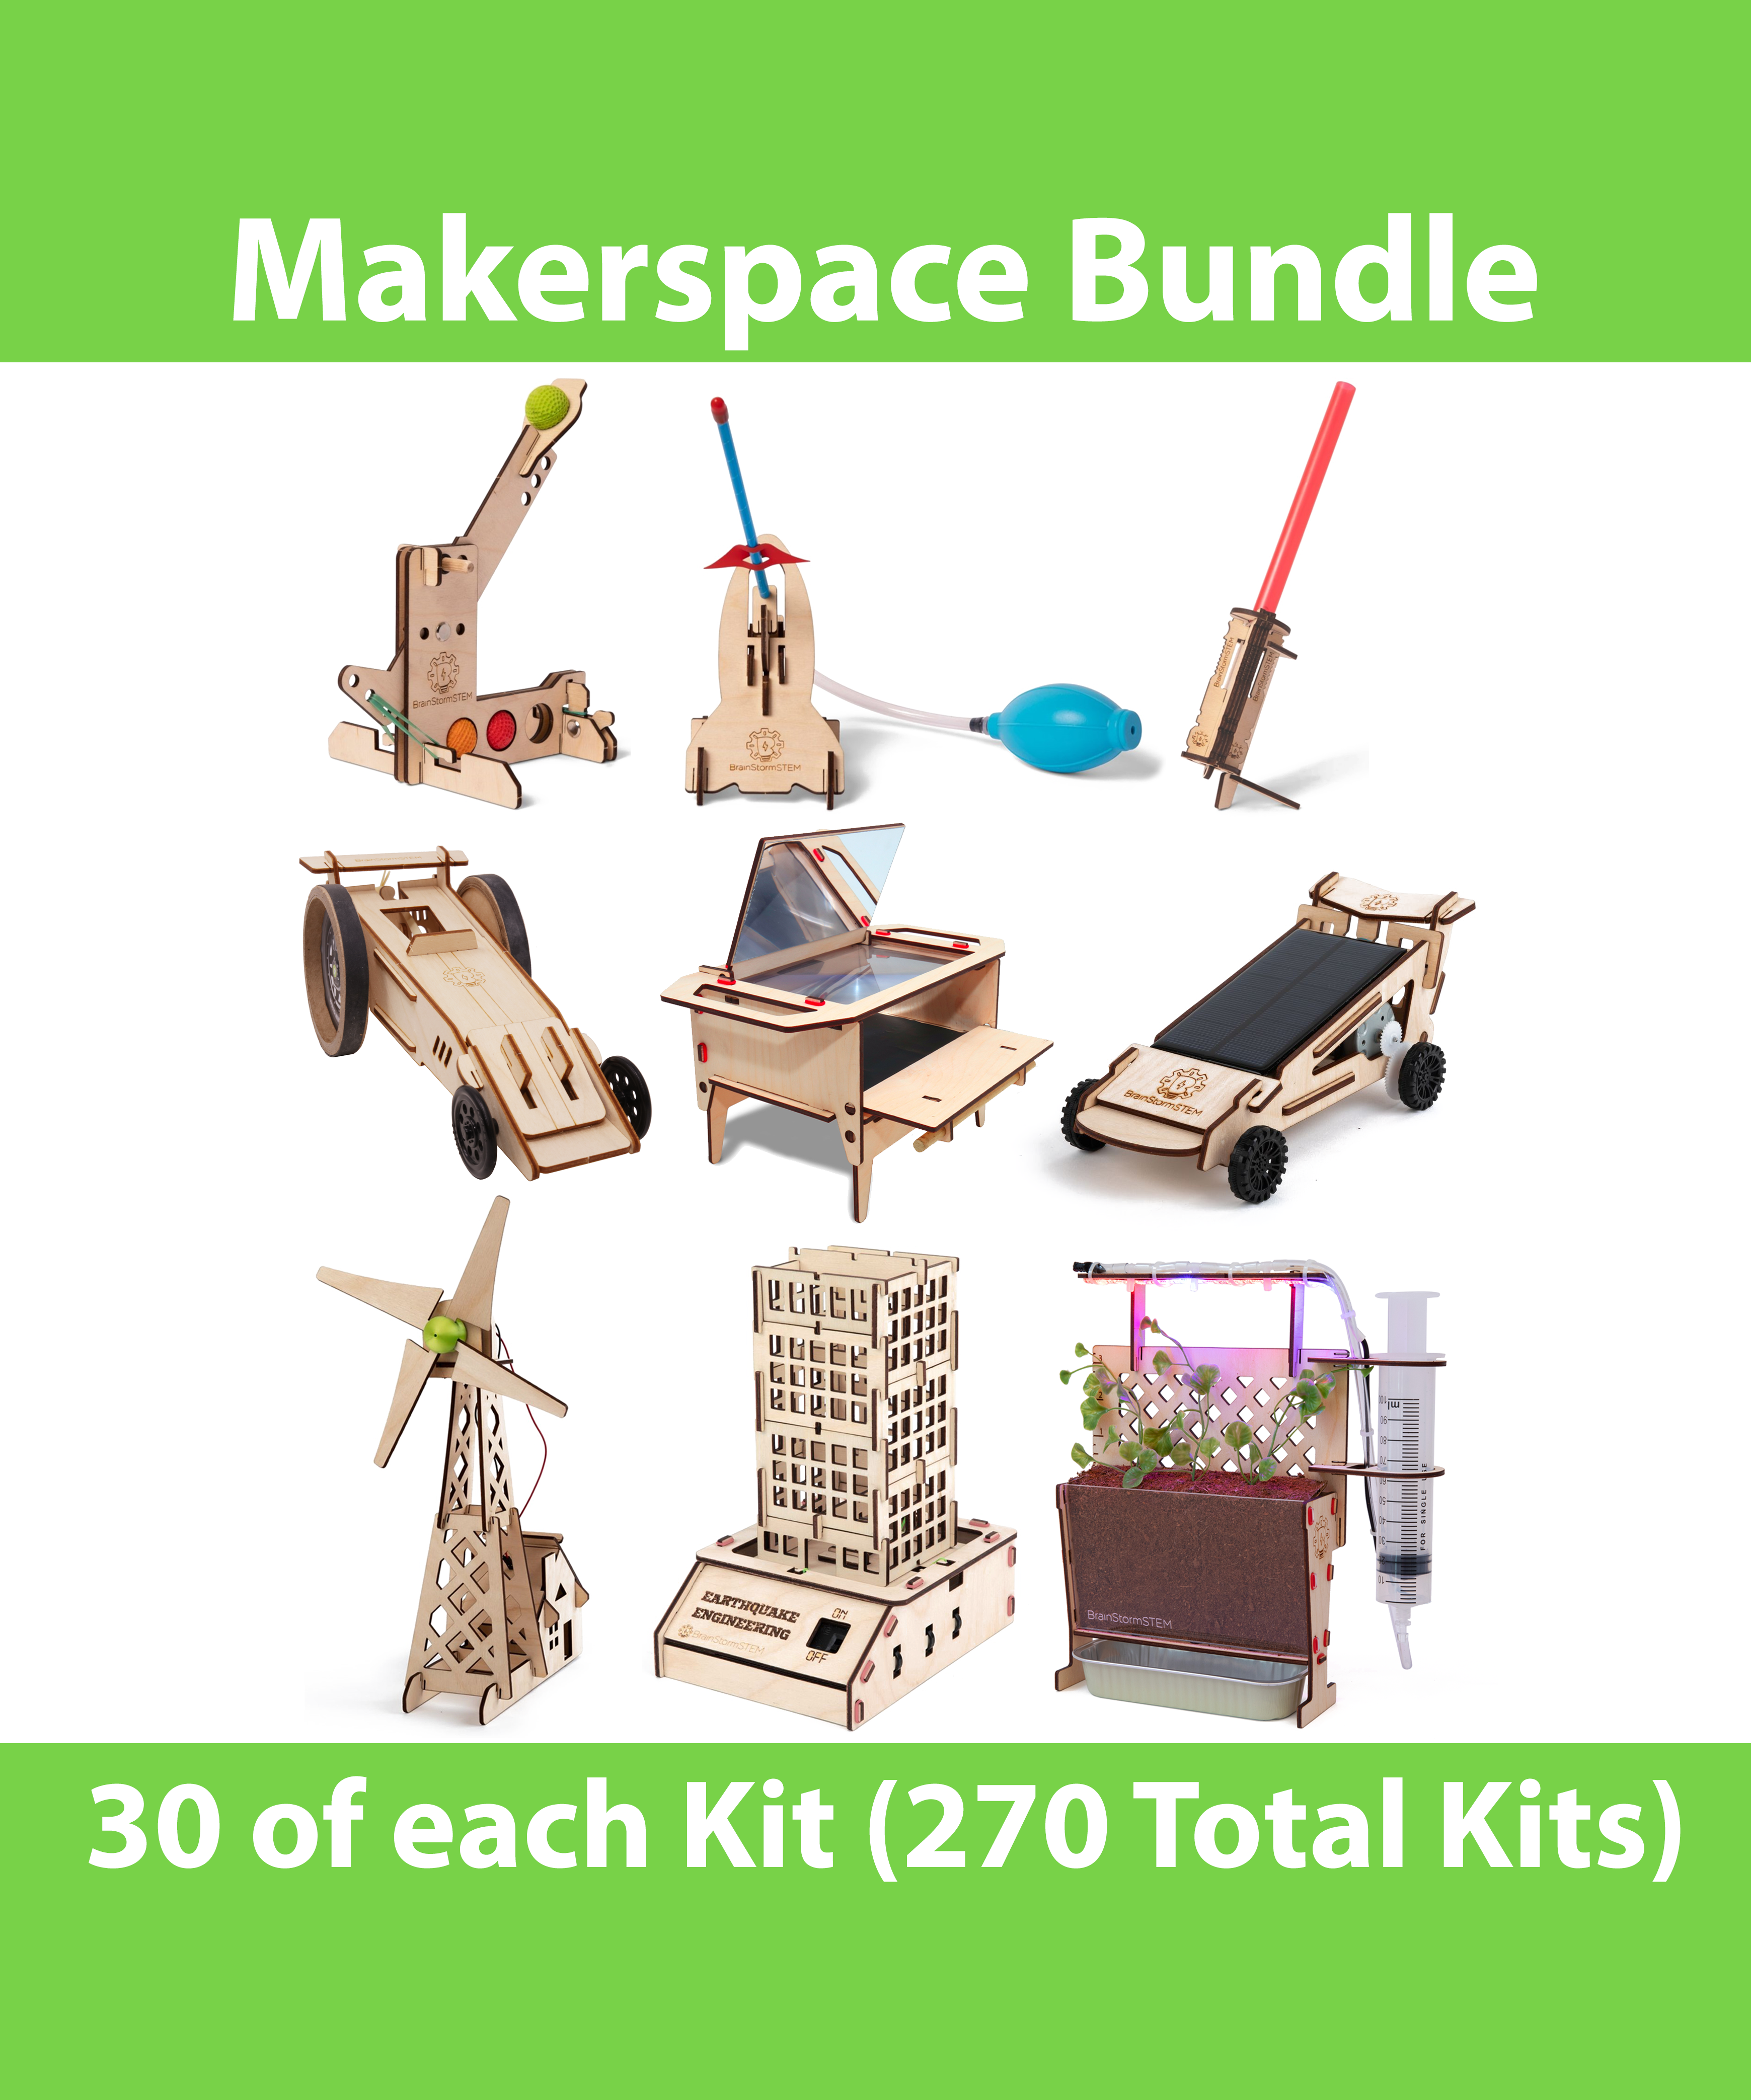 Makerspace Complete Bundle - STEM Variety Kit [30 of each kit for 270 total kits]